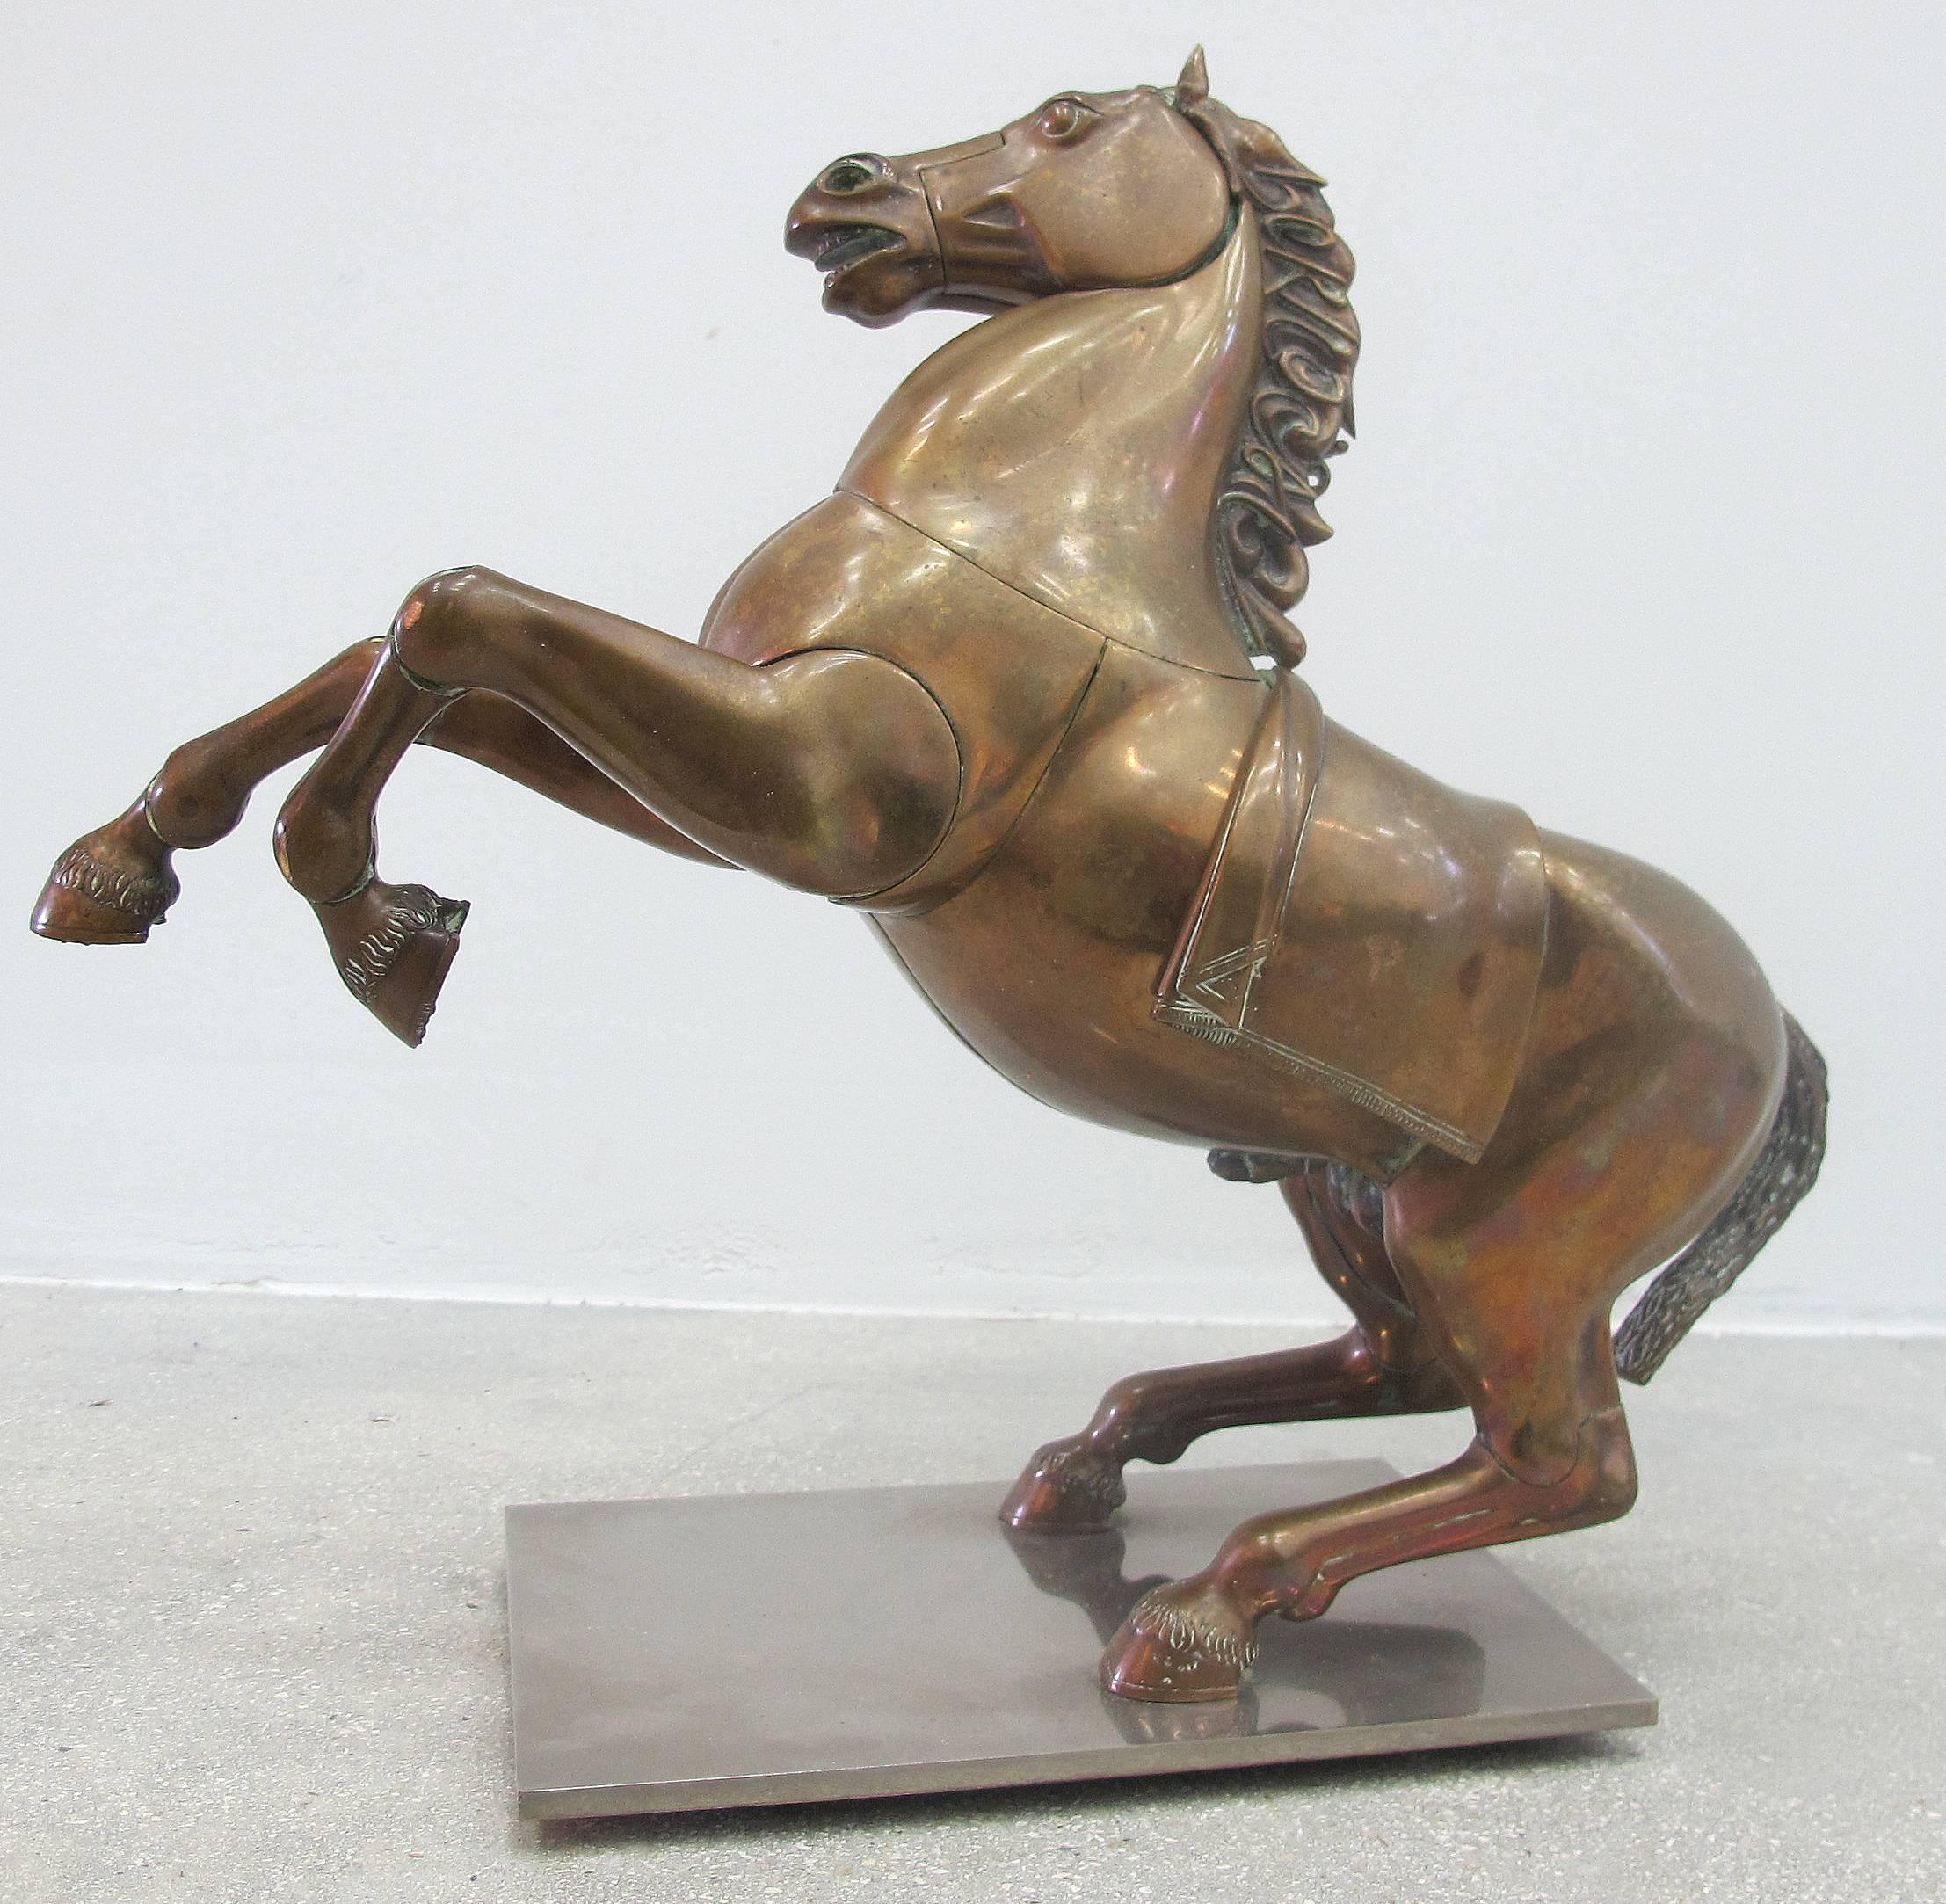 Large bronze horse sculpture by renowned Spanish sculptor Miguel Ortiz Berrocal (1933-2006). Titled "Caballo Casinaide." Horse has a stylized mane which reads Berrocal on one side and Casinaide on the other. Features articulated parts that